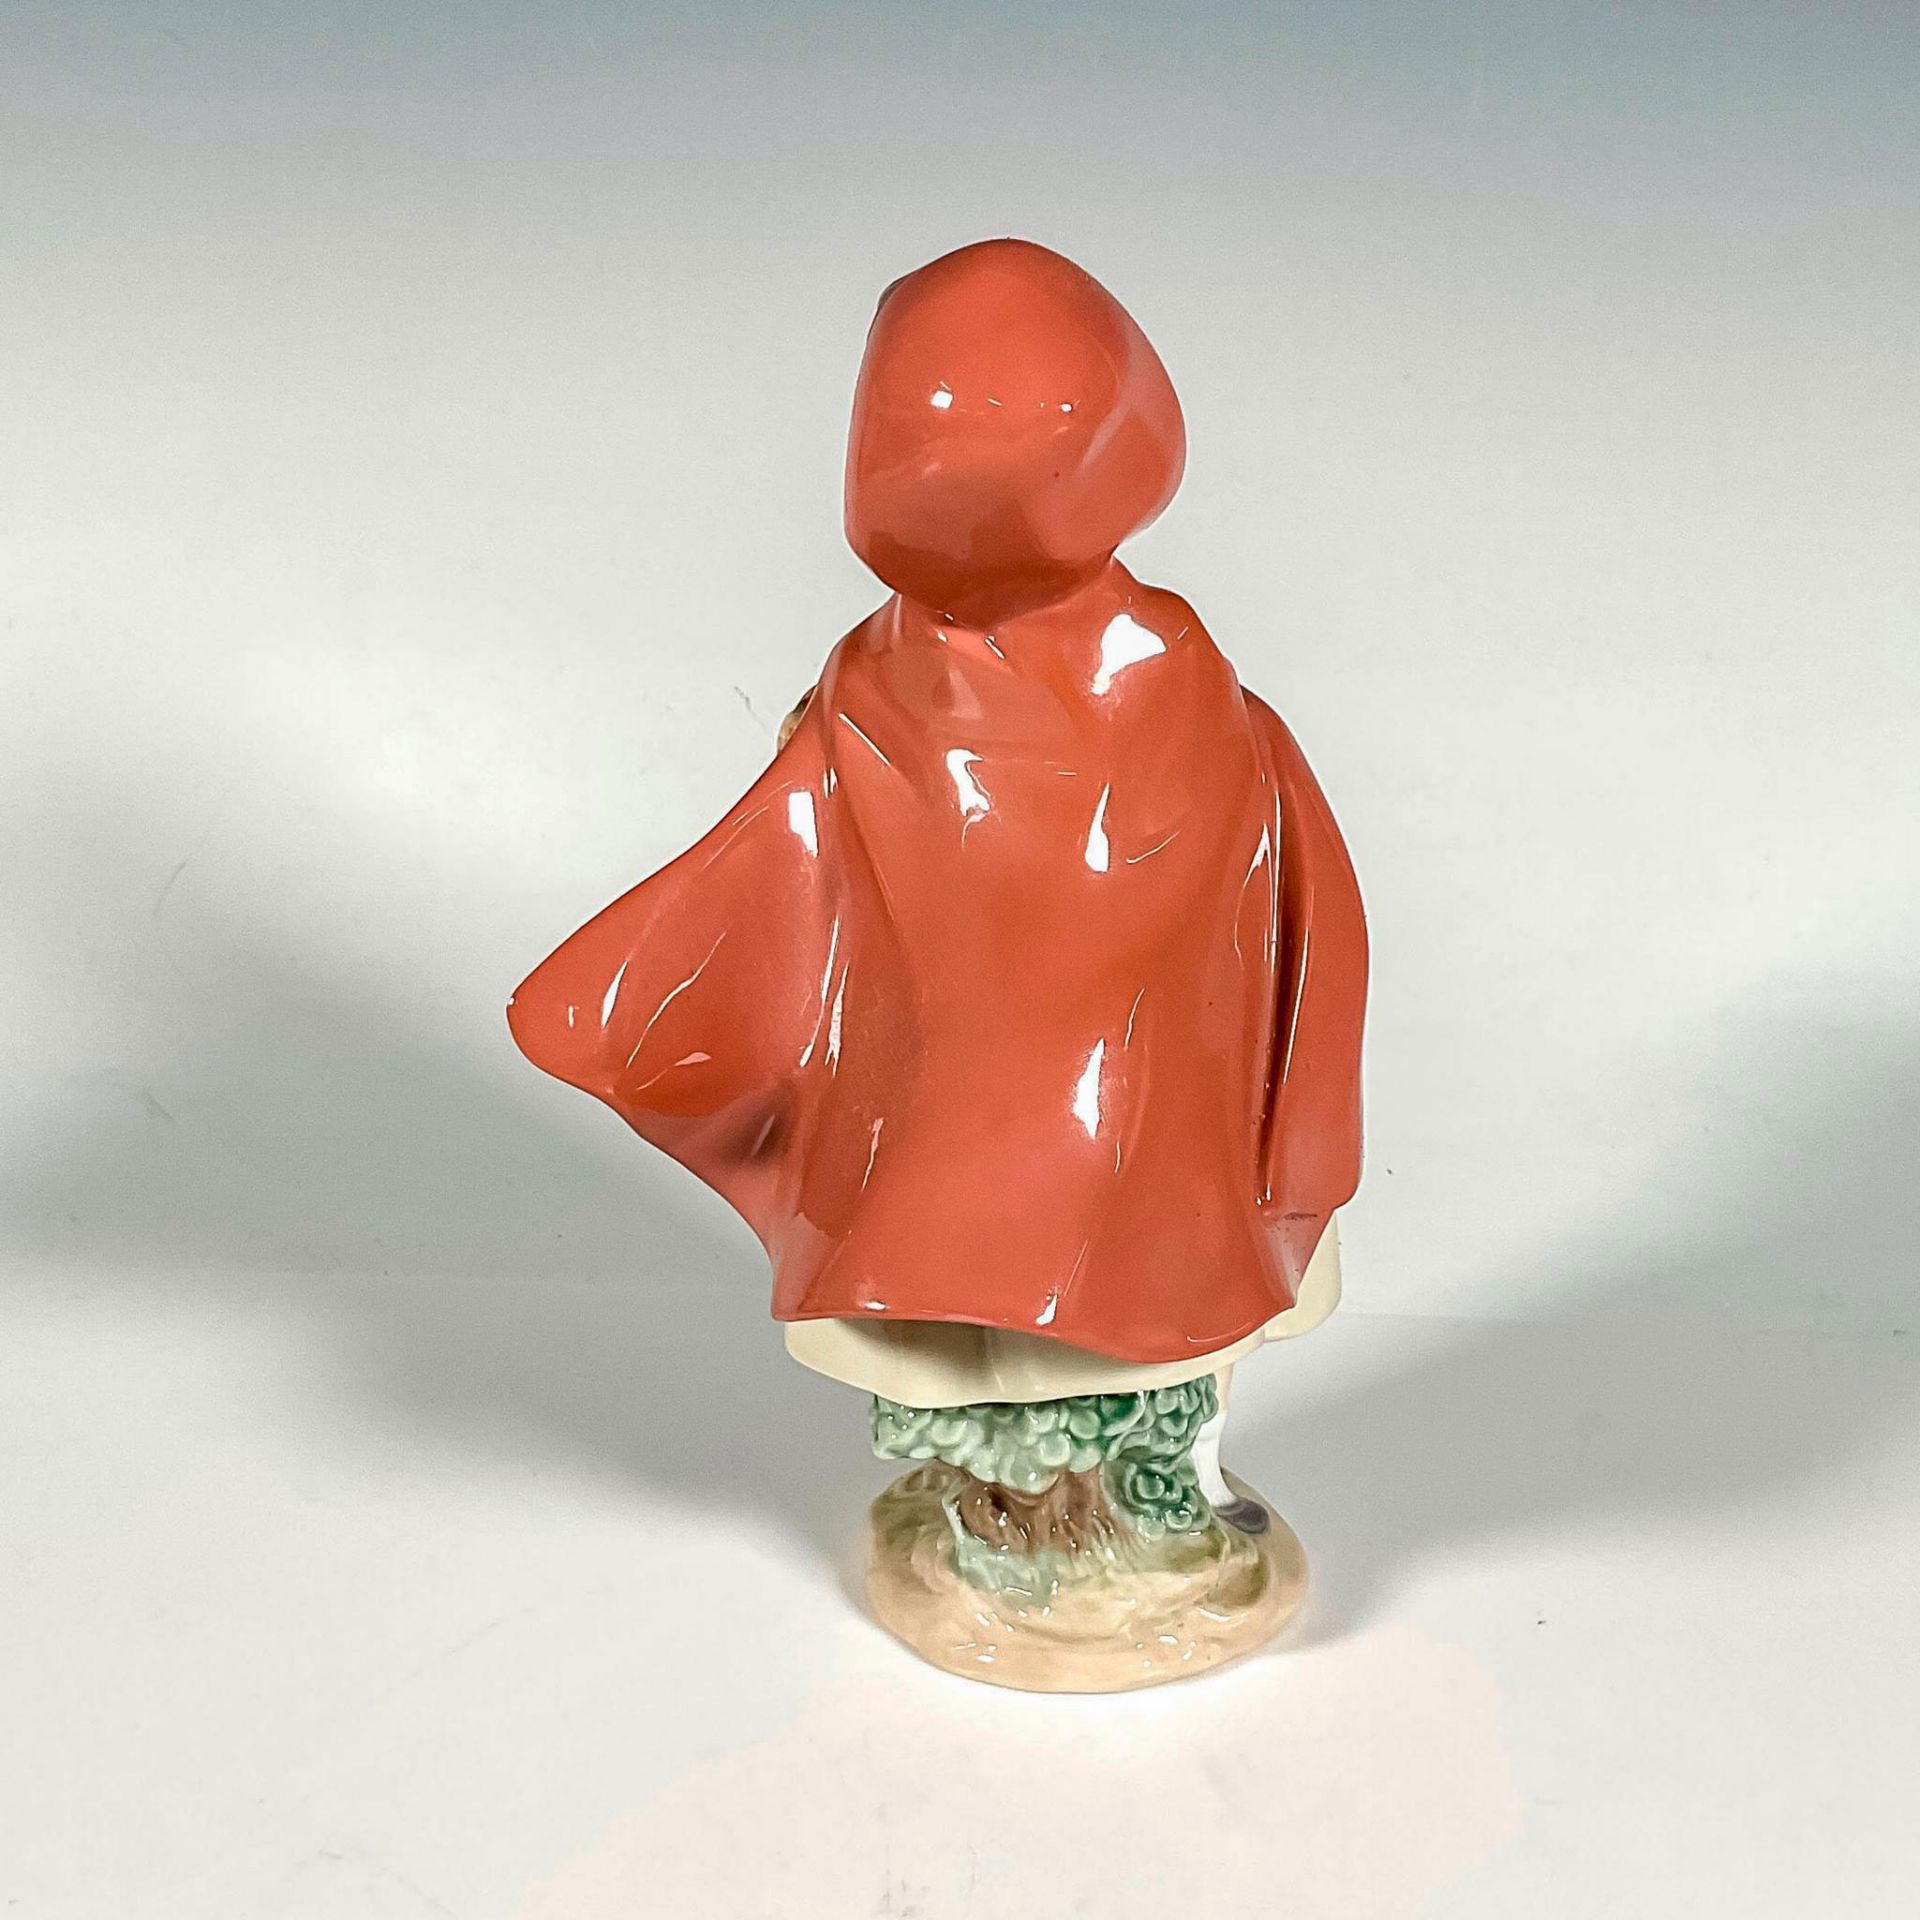 Little Red Riding Hood 1008500 - Lladro Porcelain Figurine - Image 2 of 4